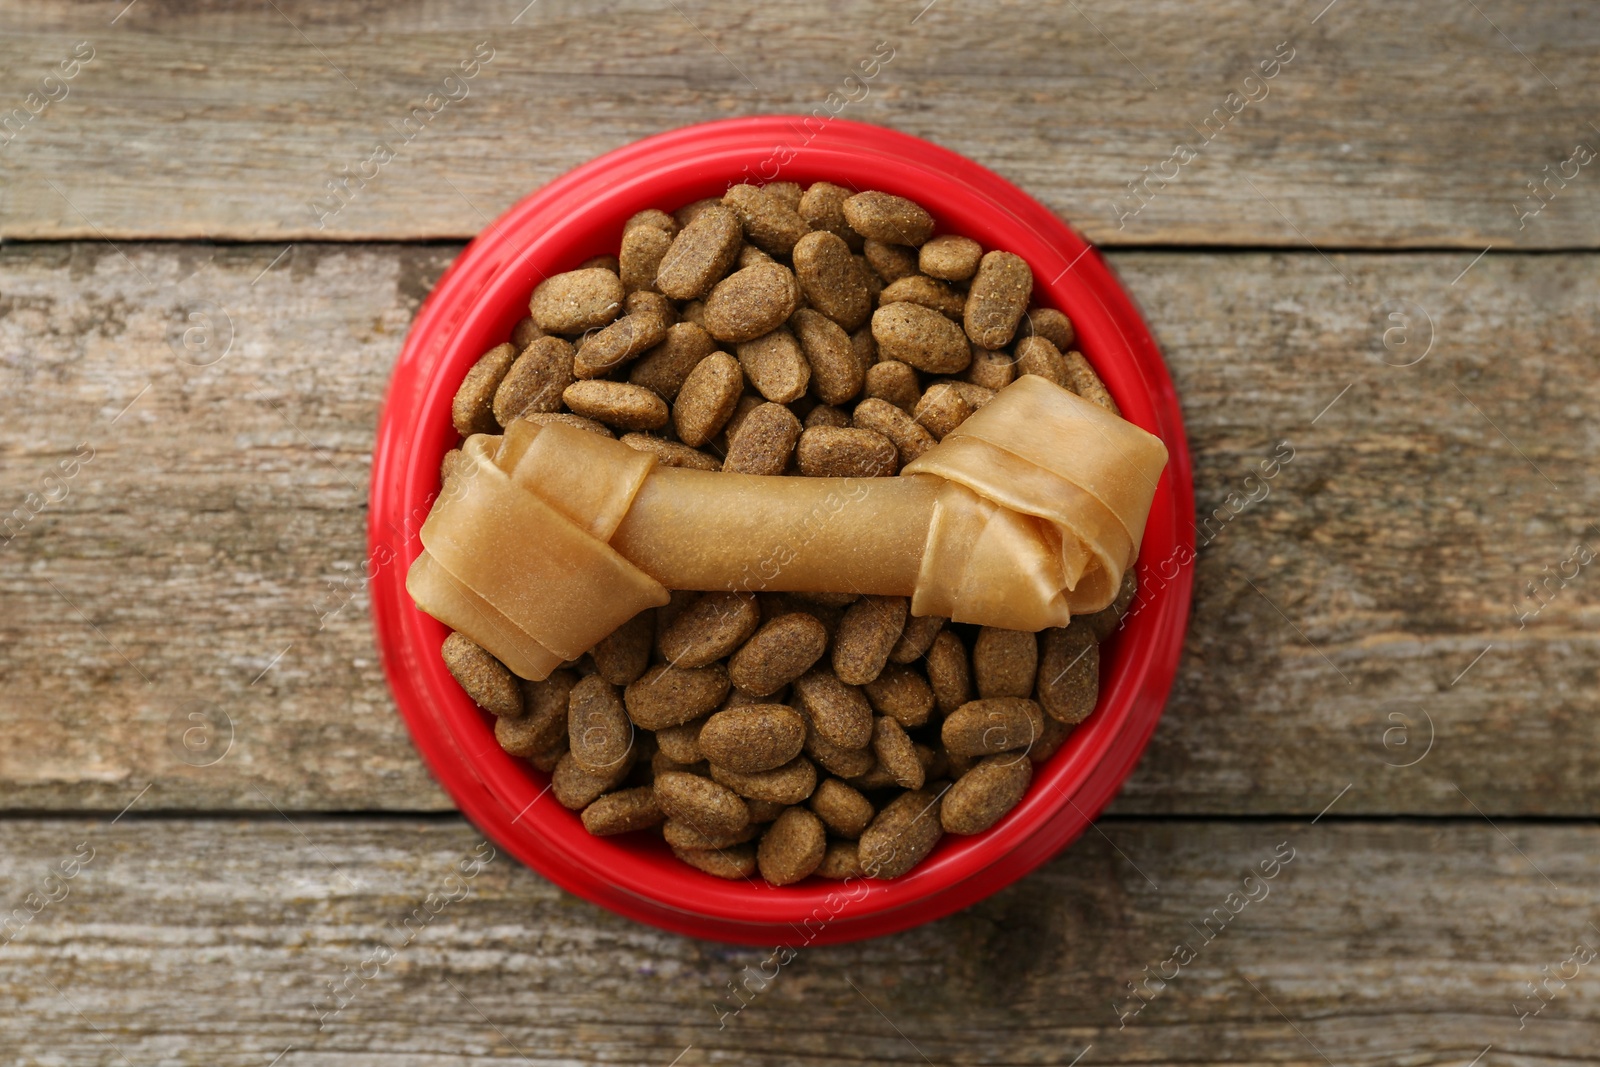 Photo of Dry dog food and treat (chew bone) on wooden floor, top view